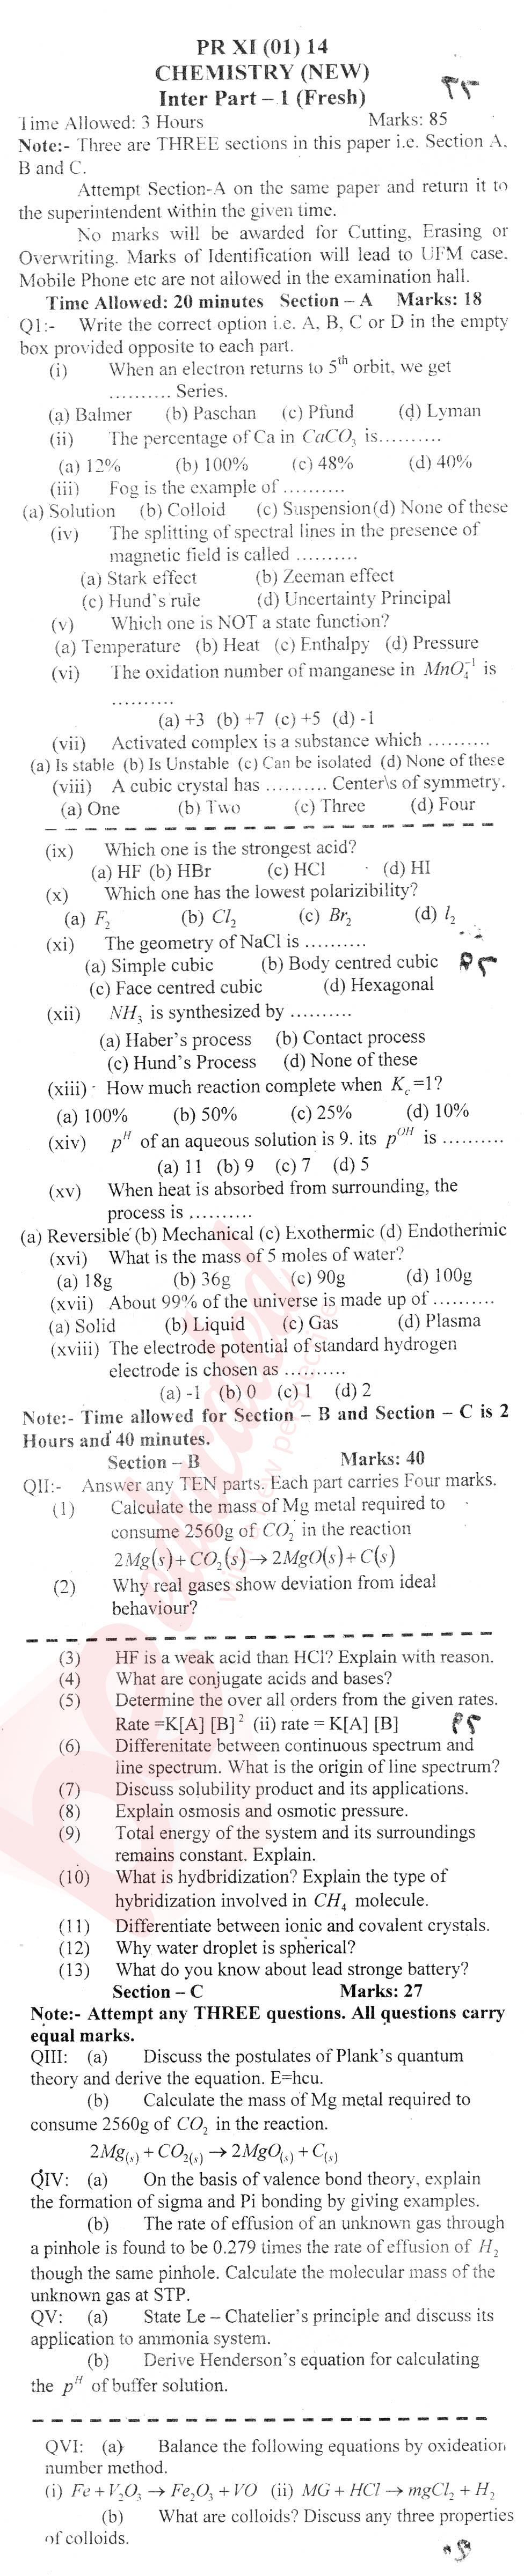 Chemistry FSC Part 1 Past Paper Group 1 BISE Malakand 2014